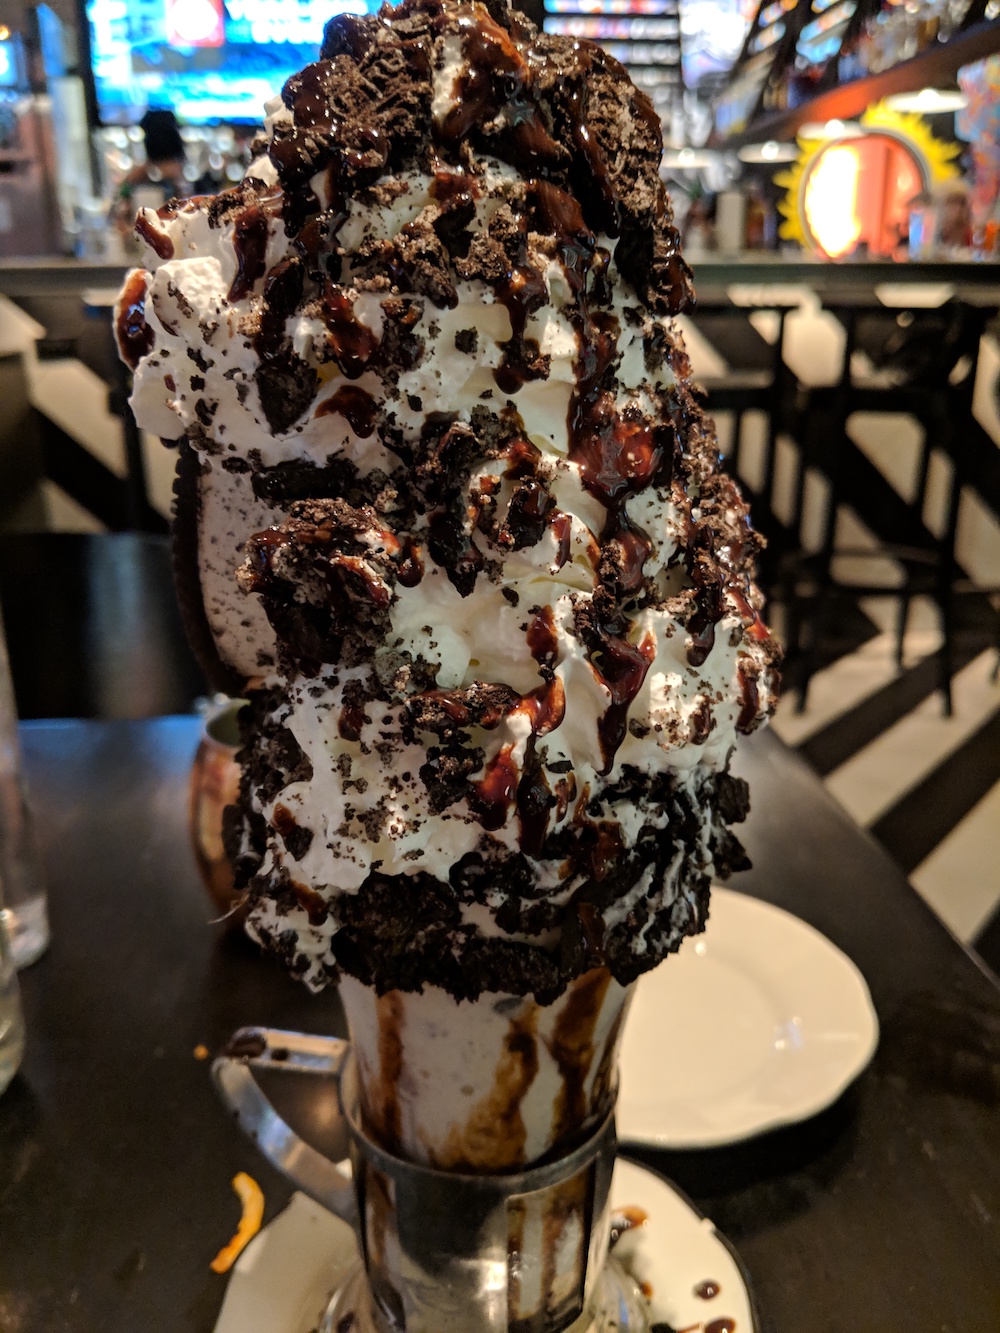 The ridiculously monstrous Cookie Shake